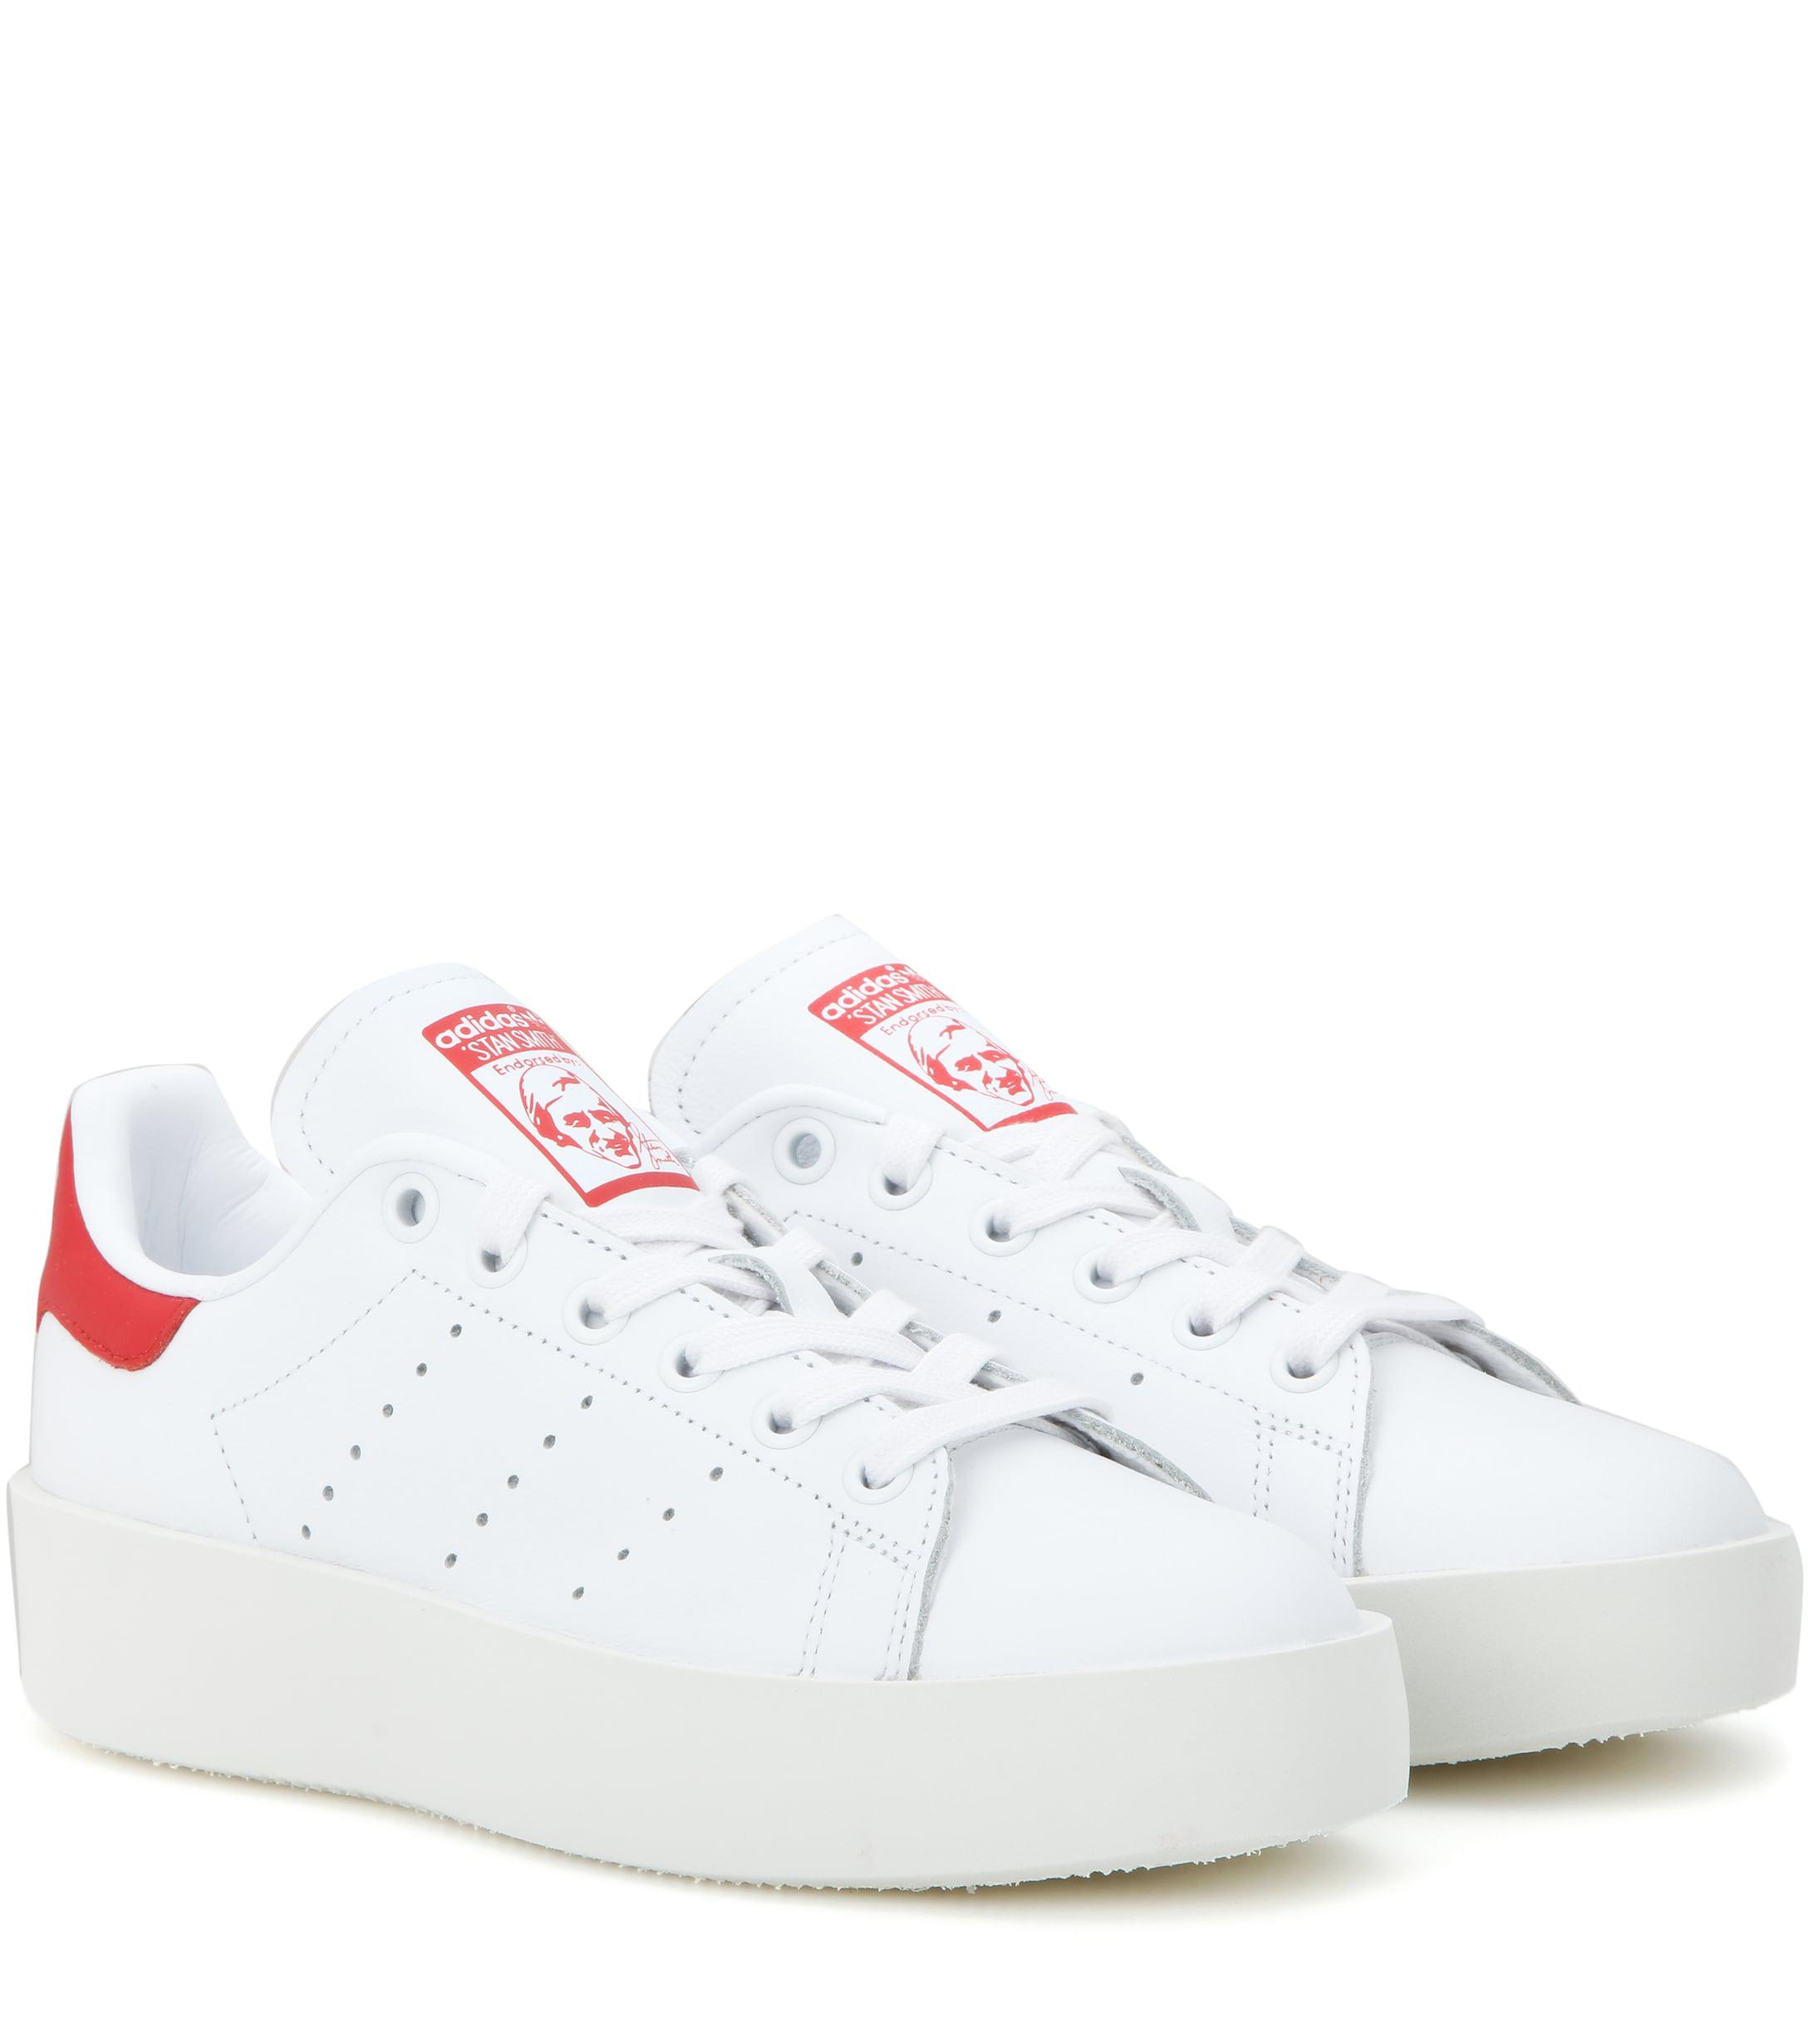 adidas Originals Stan Smith Bold Leather Sneakers in White - Lyst